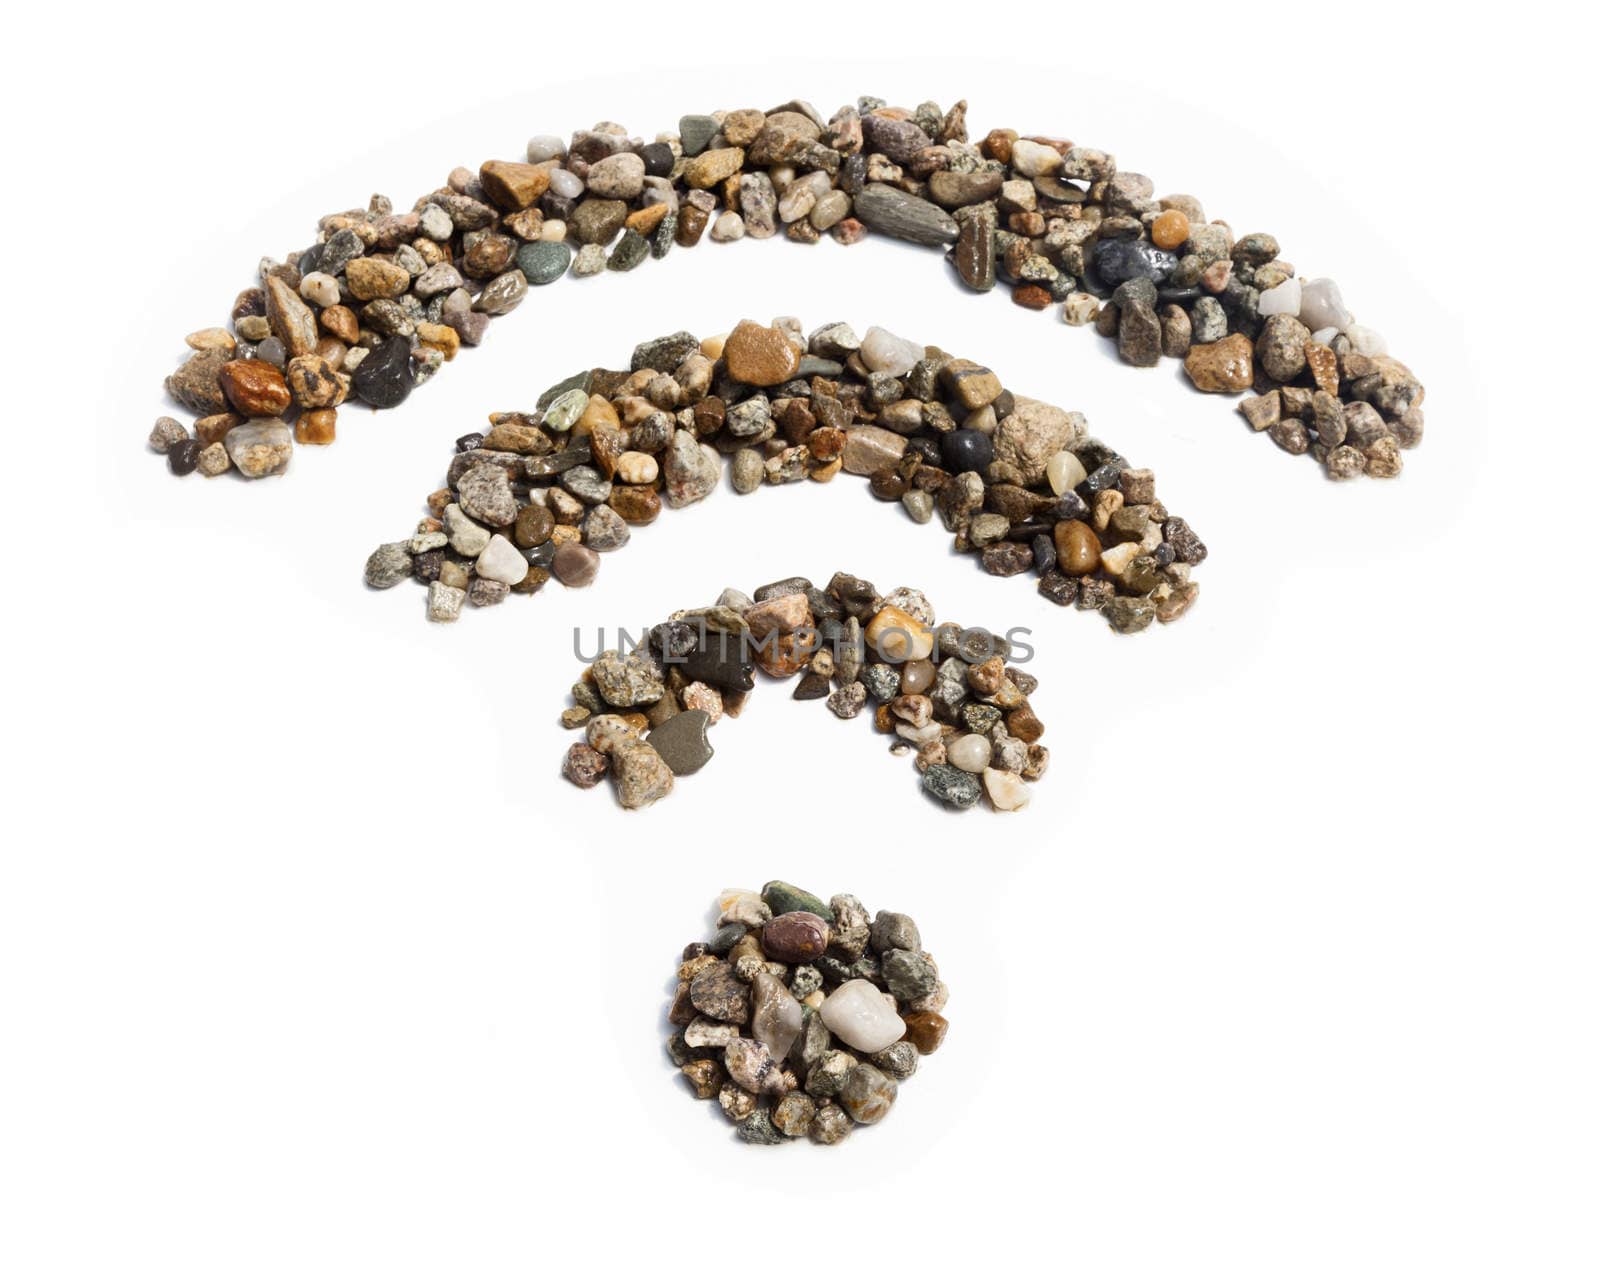 A wifi symbol made of wet pebbles and stones against a white background.